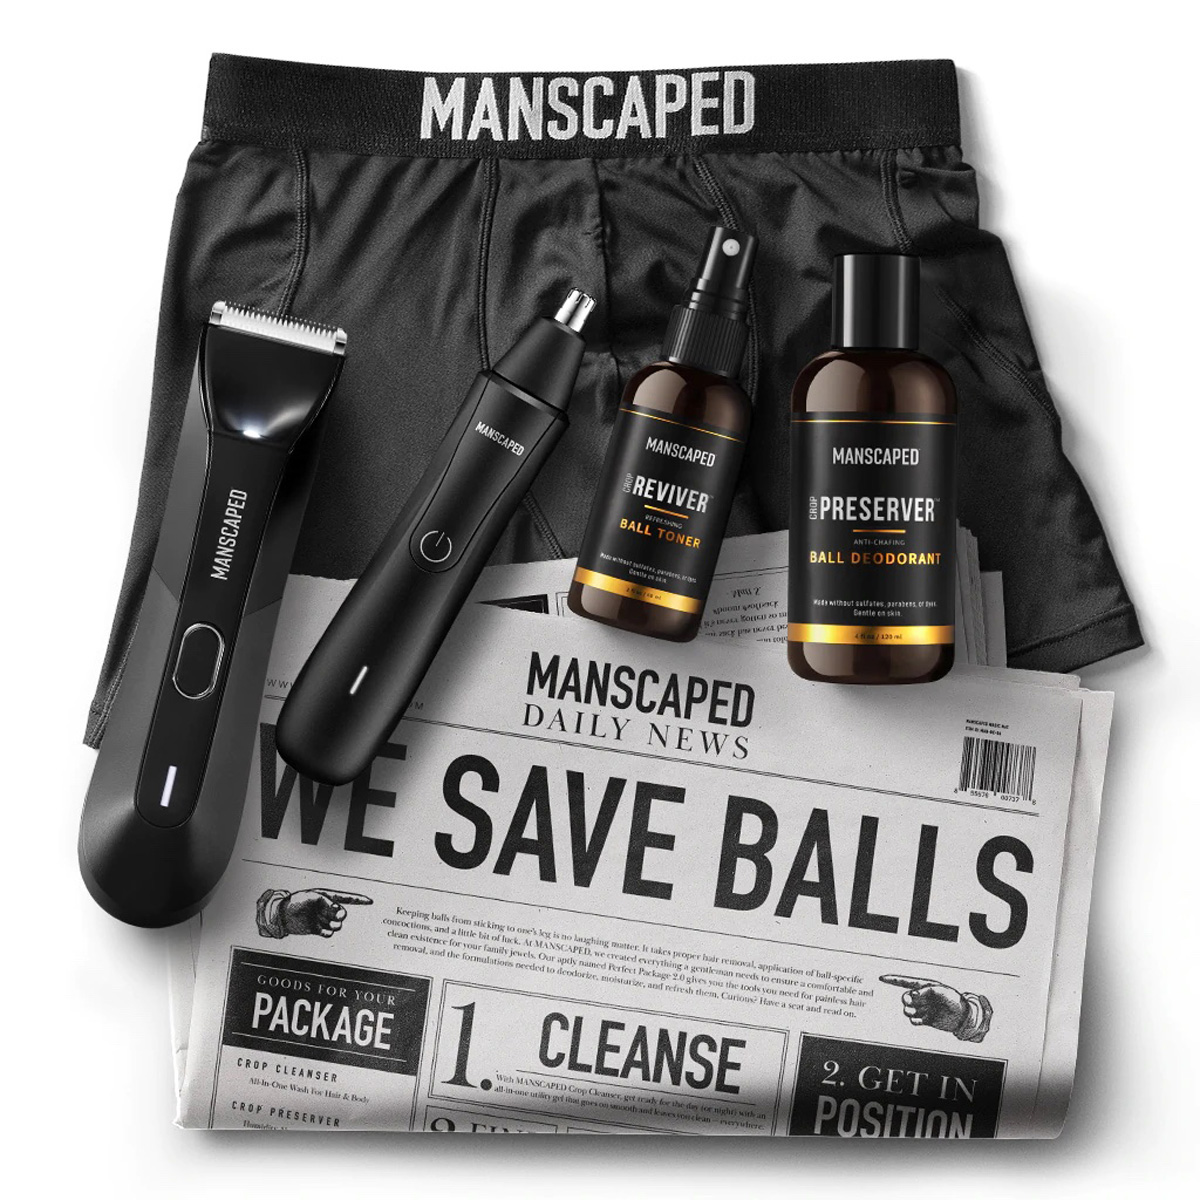 manscaped-performance-Package-4.0-man-for-himself